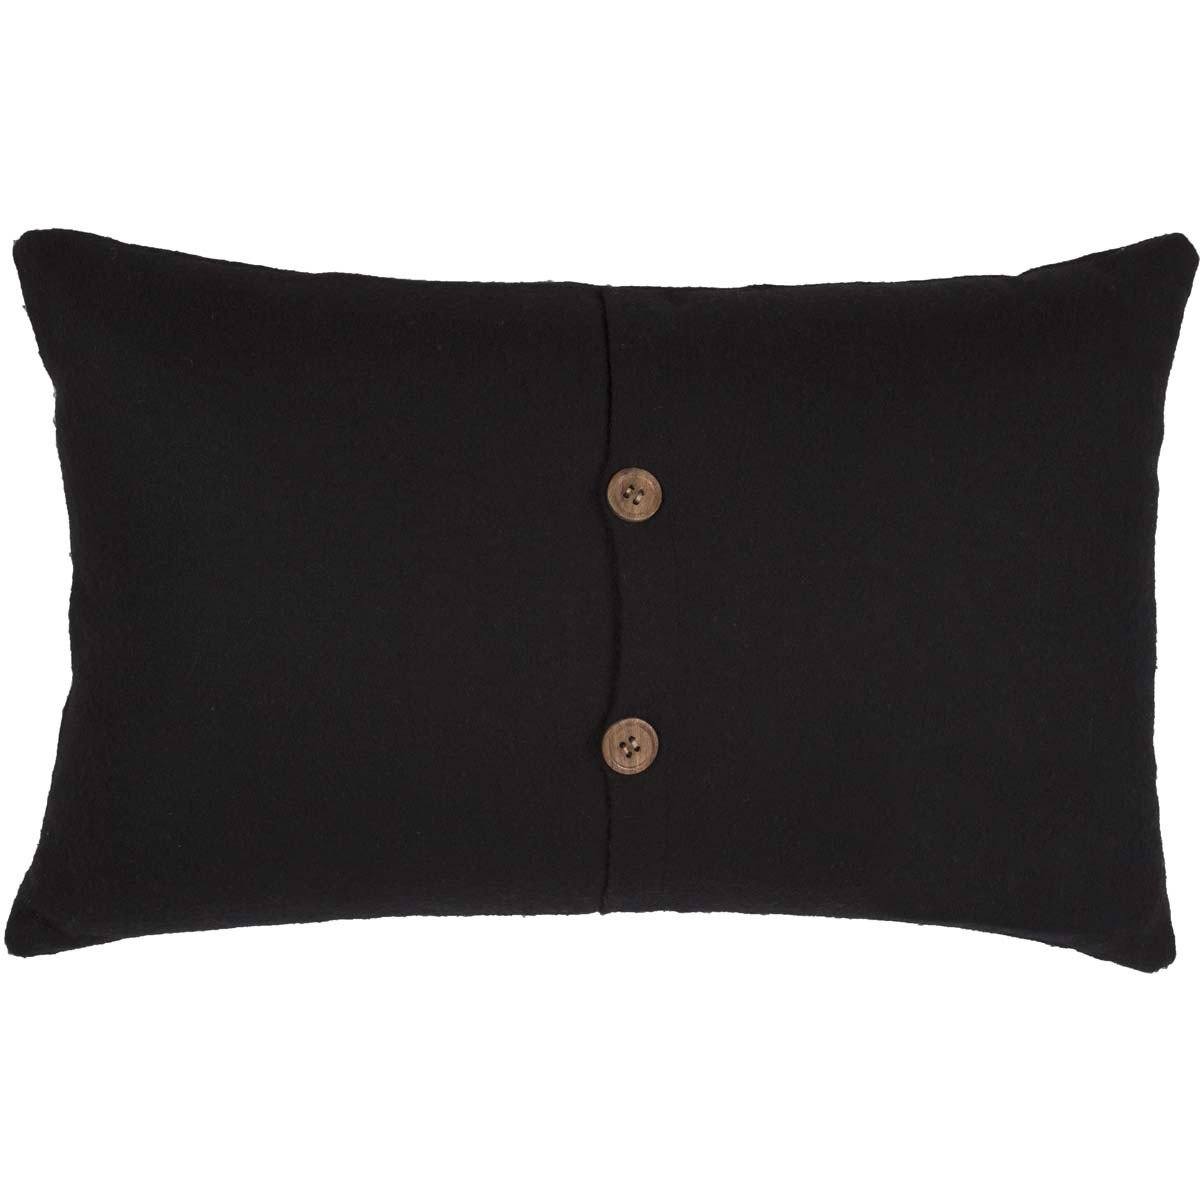 Heritage Farms Primitive Blessings Pillow 14x22 Pillows VHC Brands 